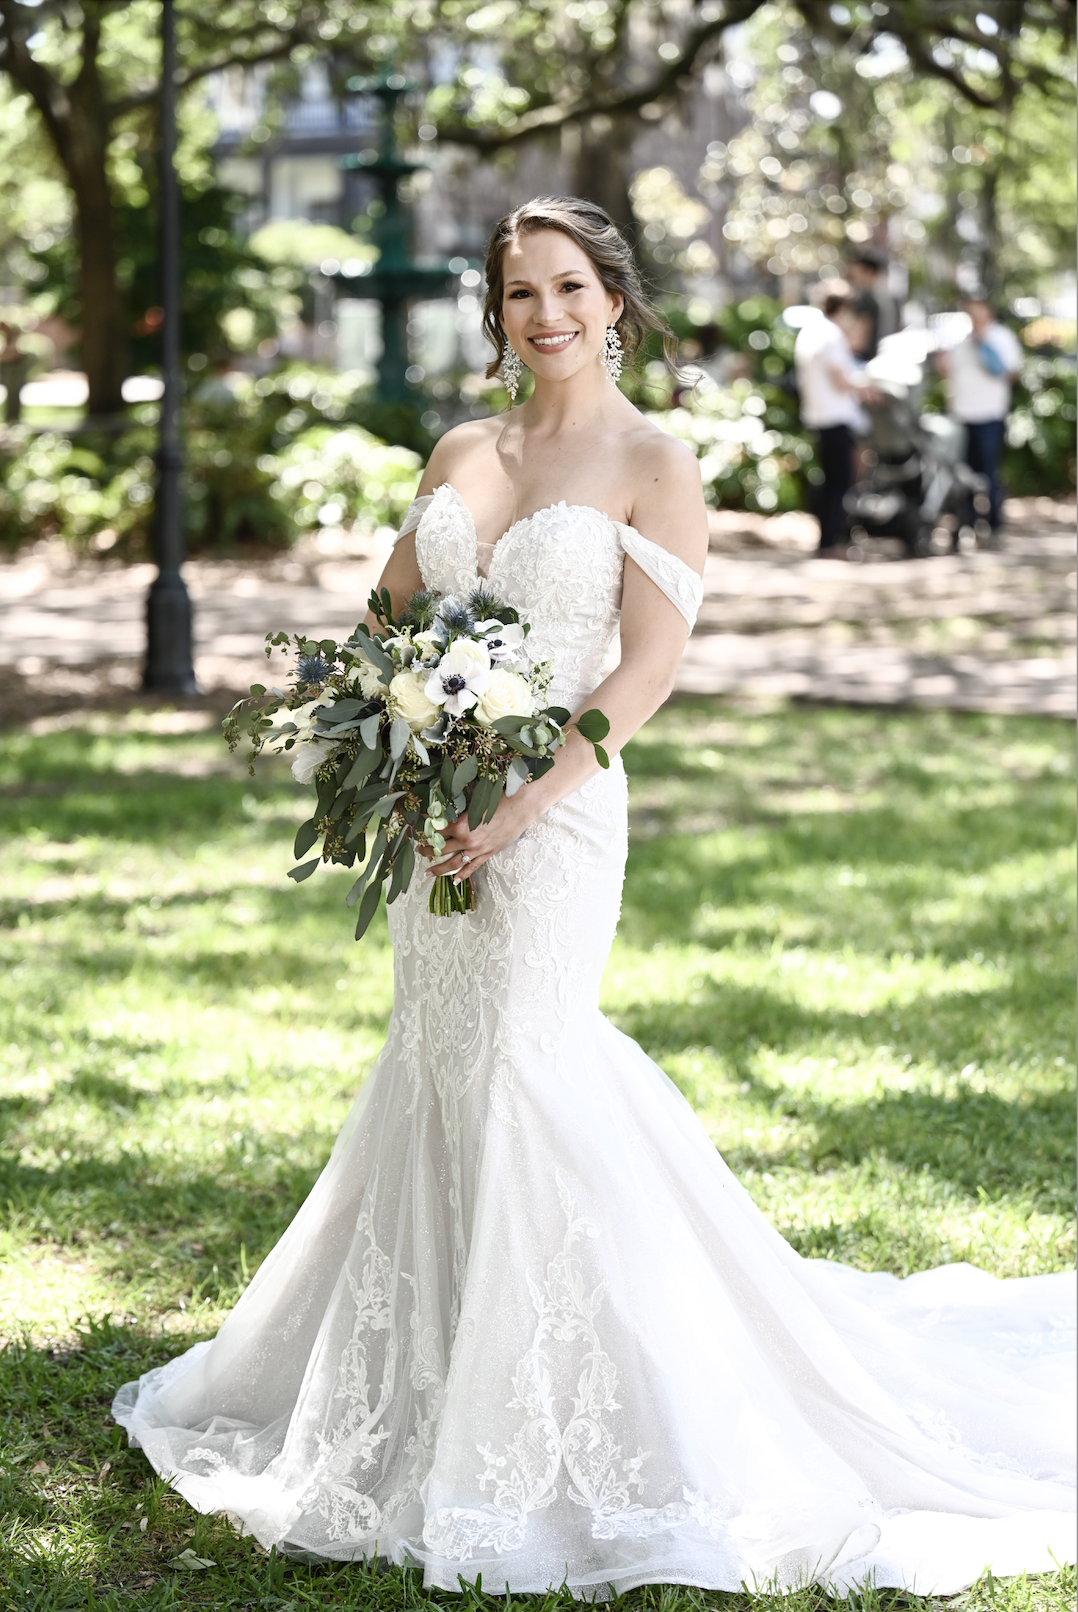 ivory-and-beau-bride-natalie-in-flattering-lace-fitted-mermaid-wedding-dress-named-frederique-by-maggie-sottero-purchased-from-savannah-bridal-shop-ivory-and-beau-1.png